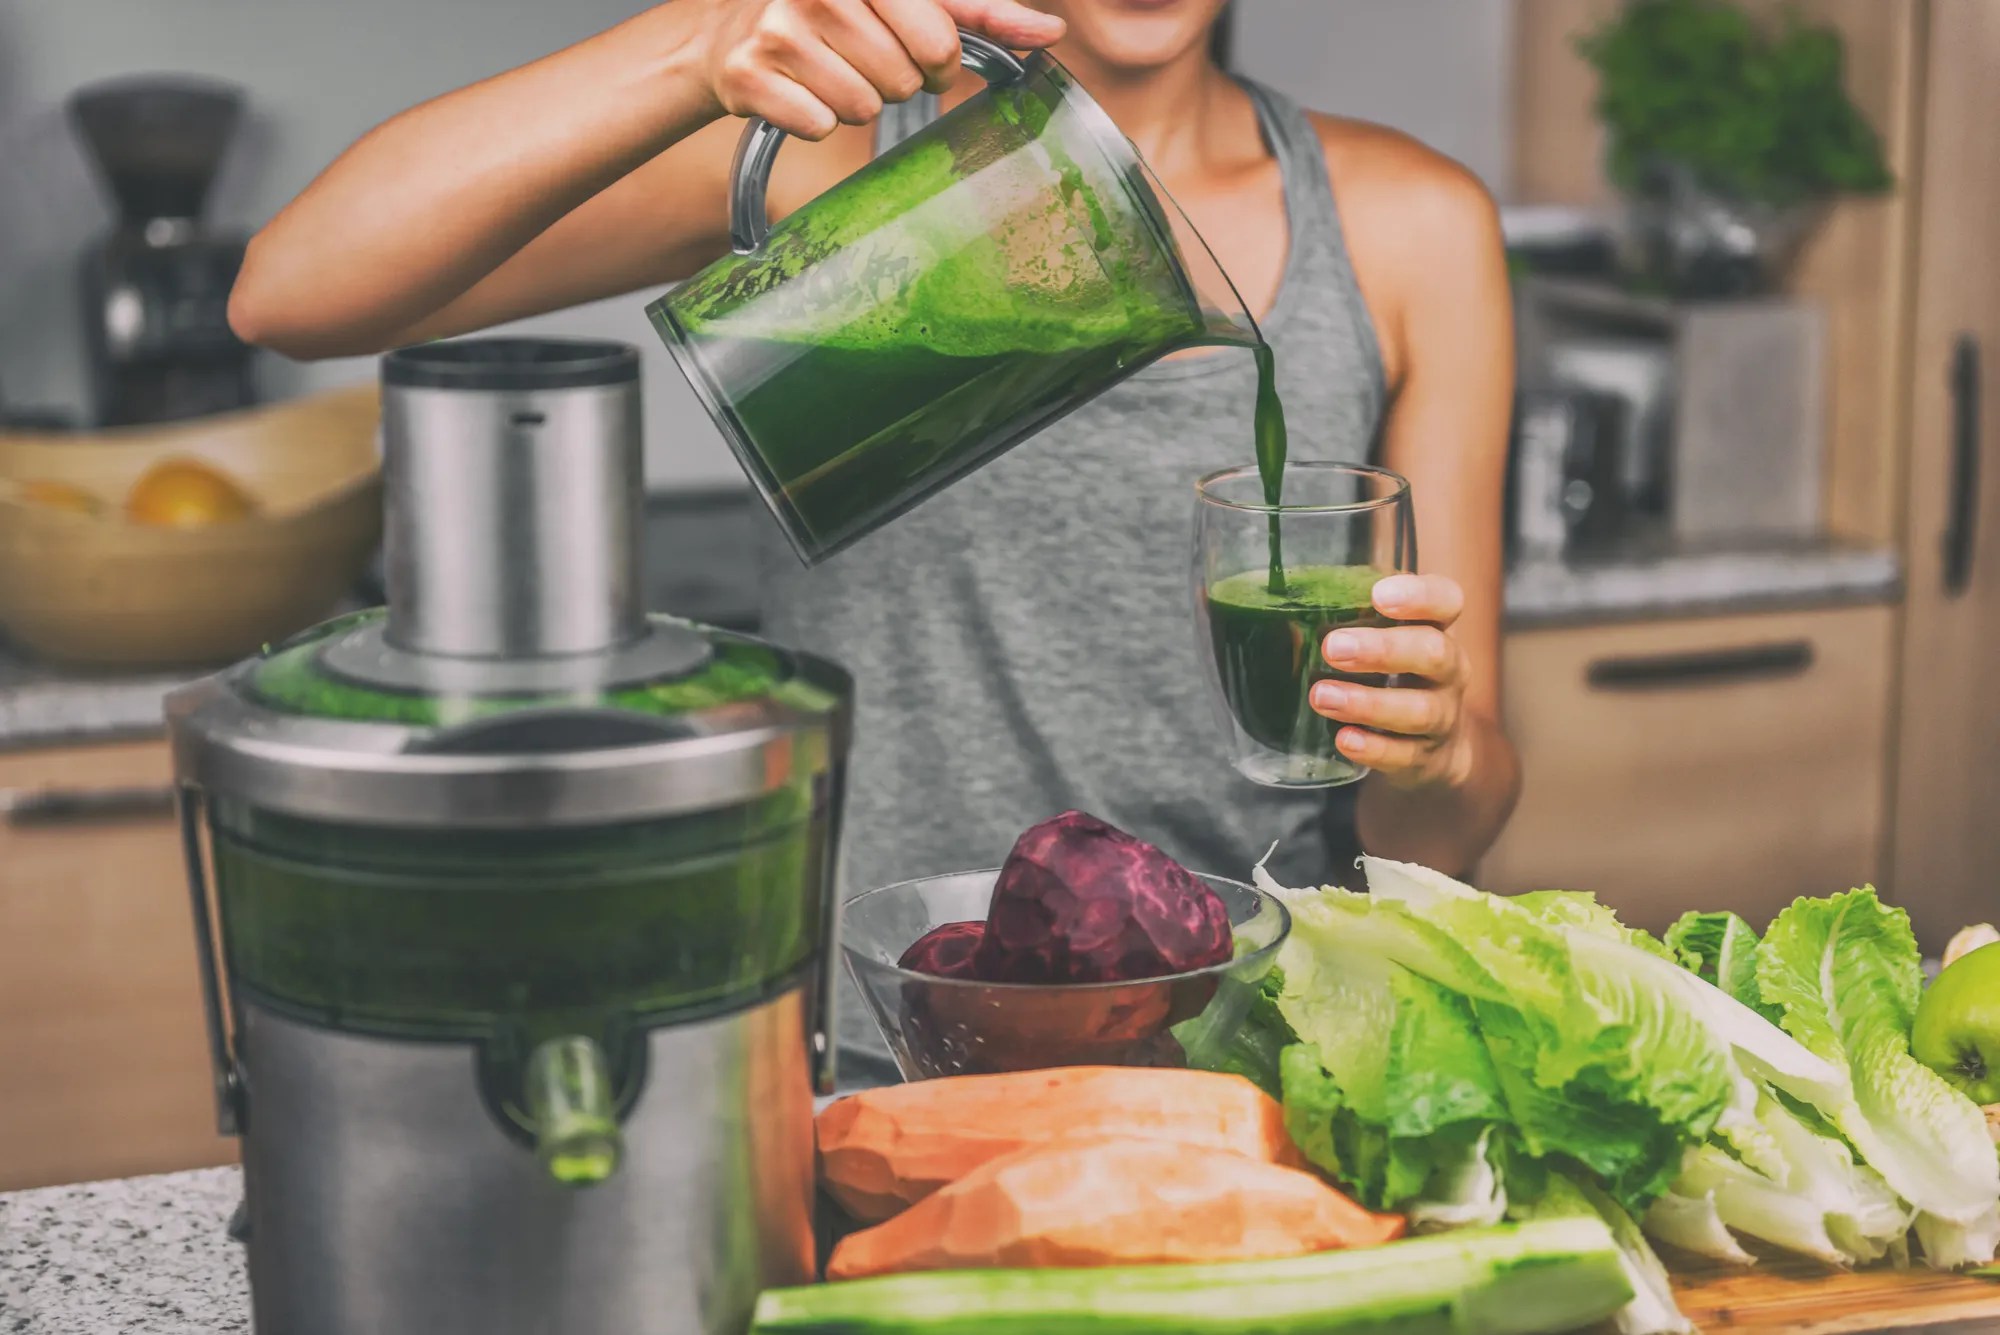 Are Juice Cleanses Really Good For You? An Expert Weighs In